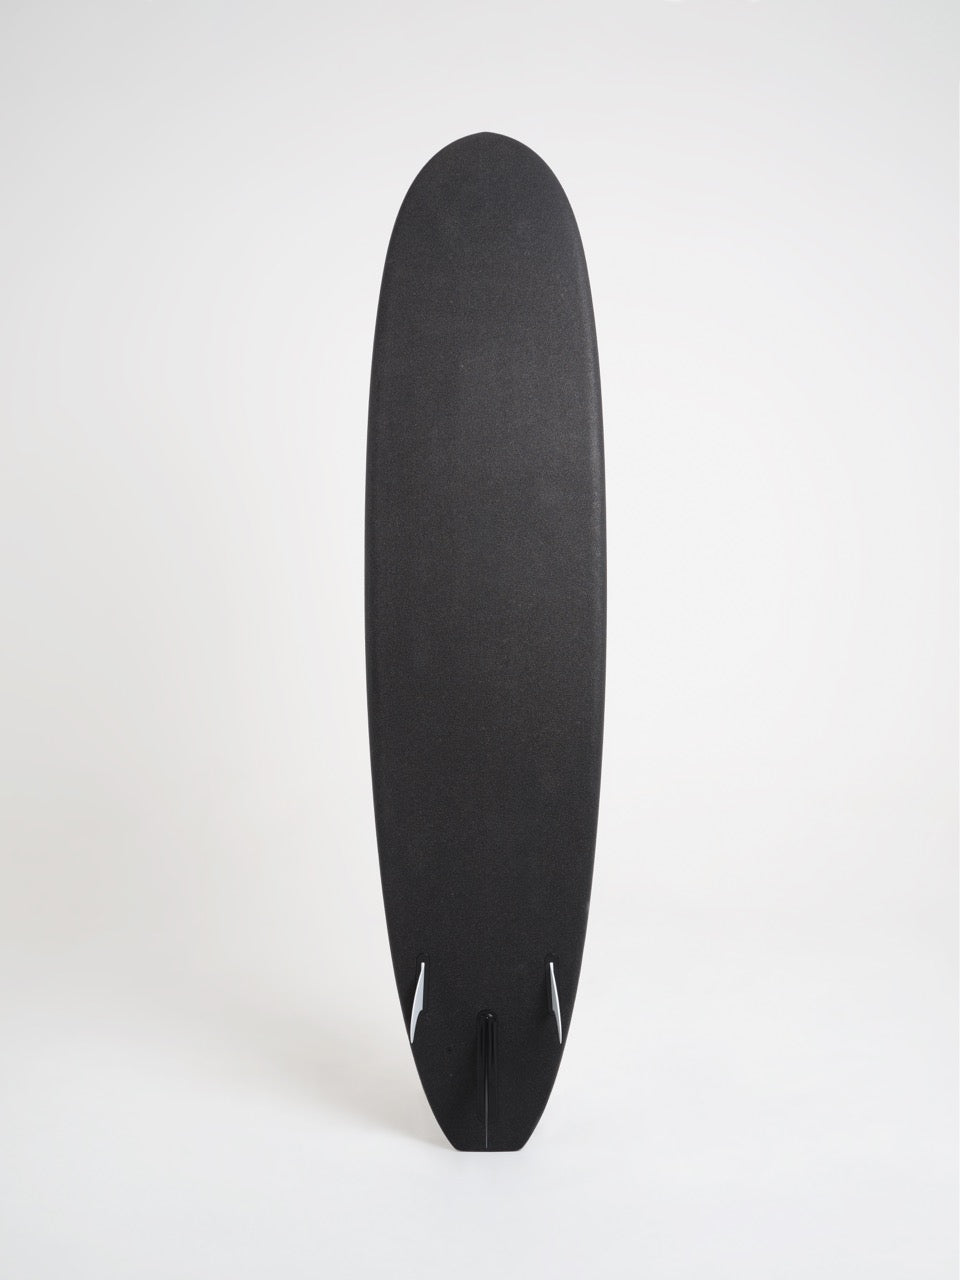 The backside of a black 8 foot Positive Vibe Warriors Scout surfboard with two fins on a white background